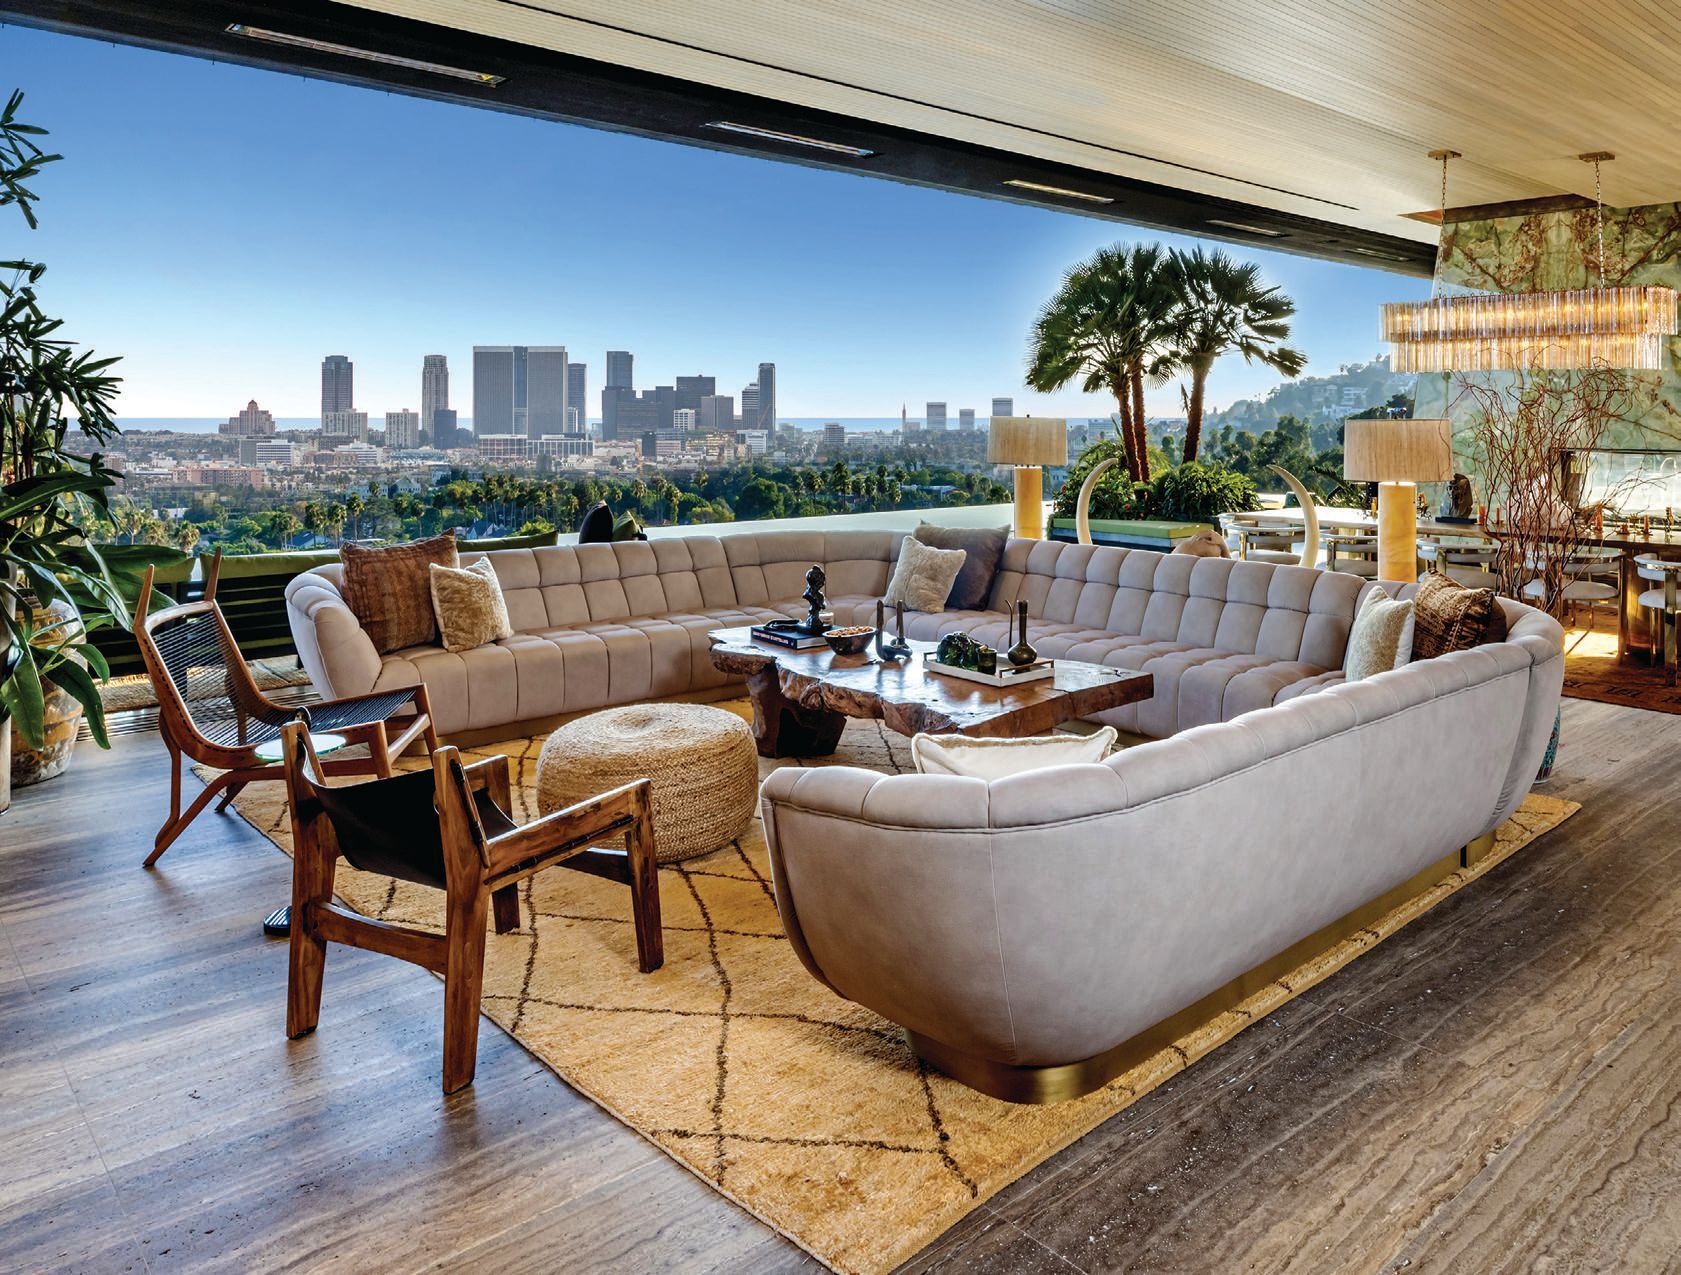 A living room has never been more lovely amid tropical aesthetics and midcentury modern furnishings—opening up to the Sunset Strip below PHOTO BY SIMON BERLYN